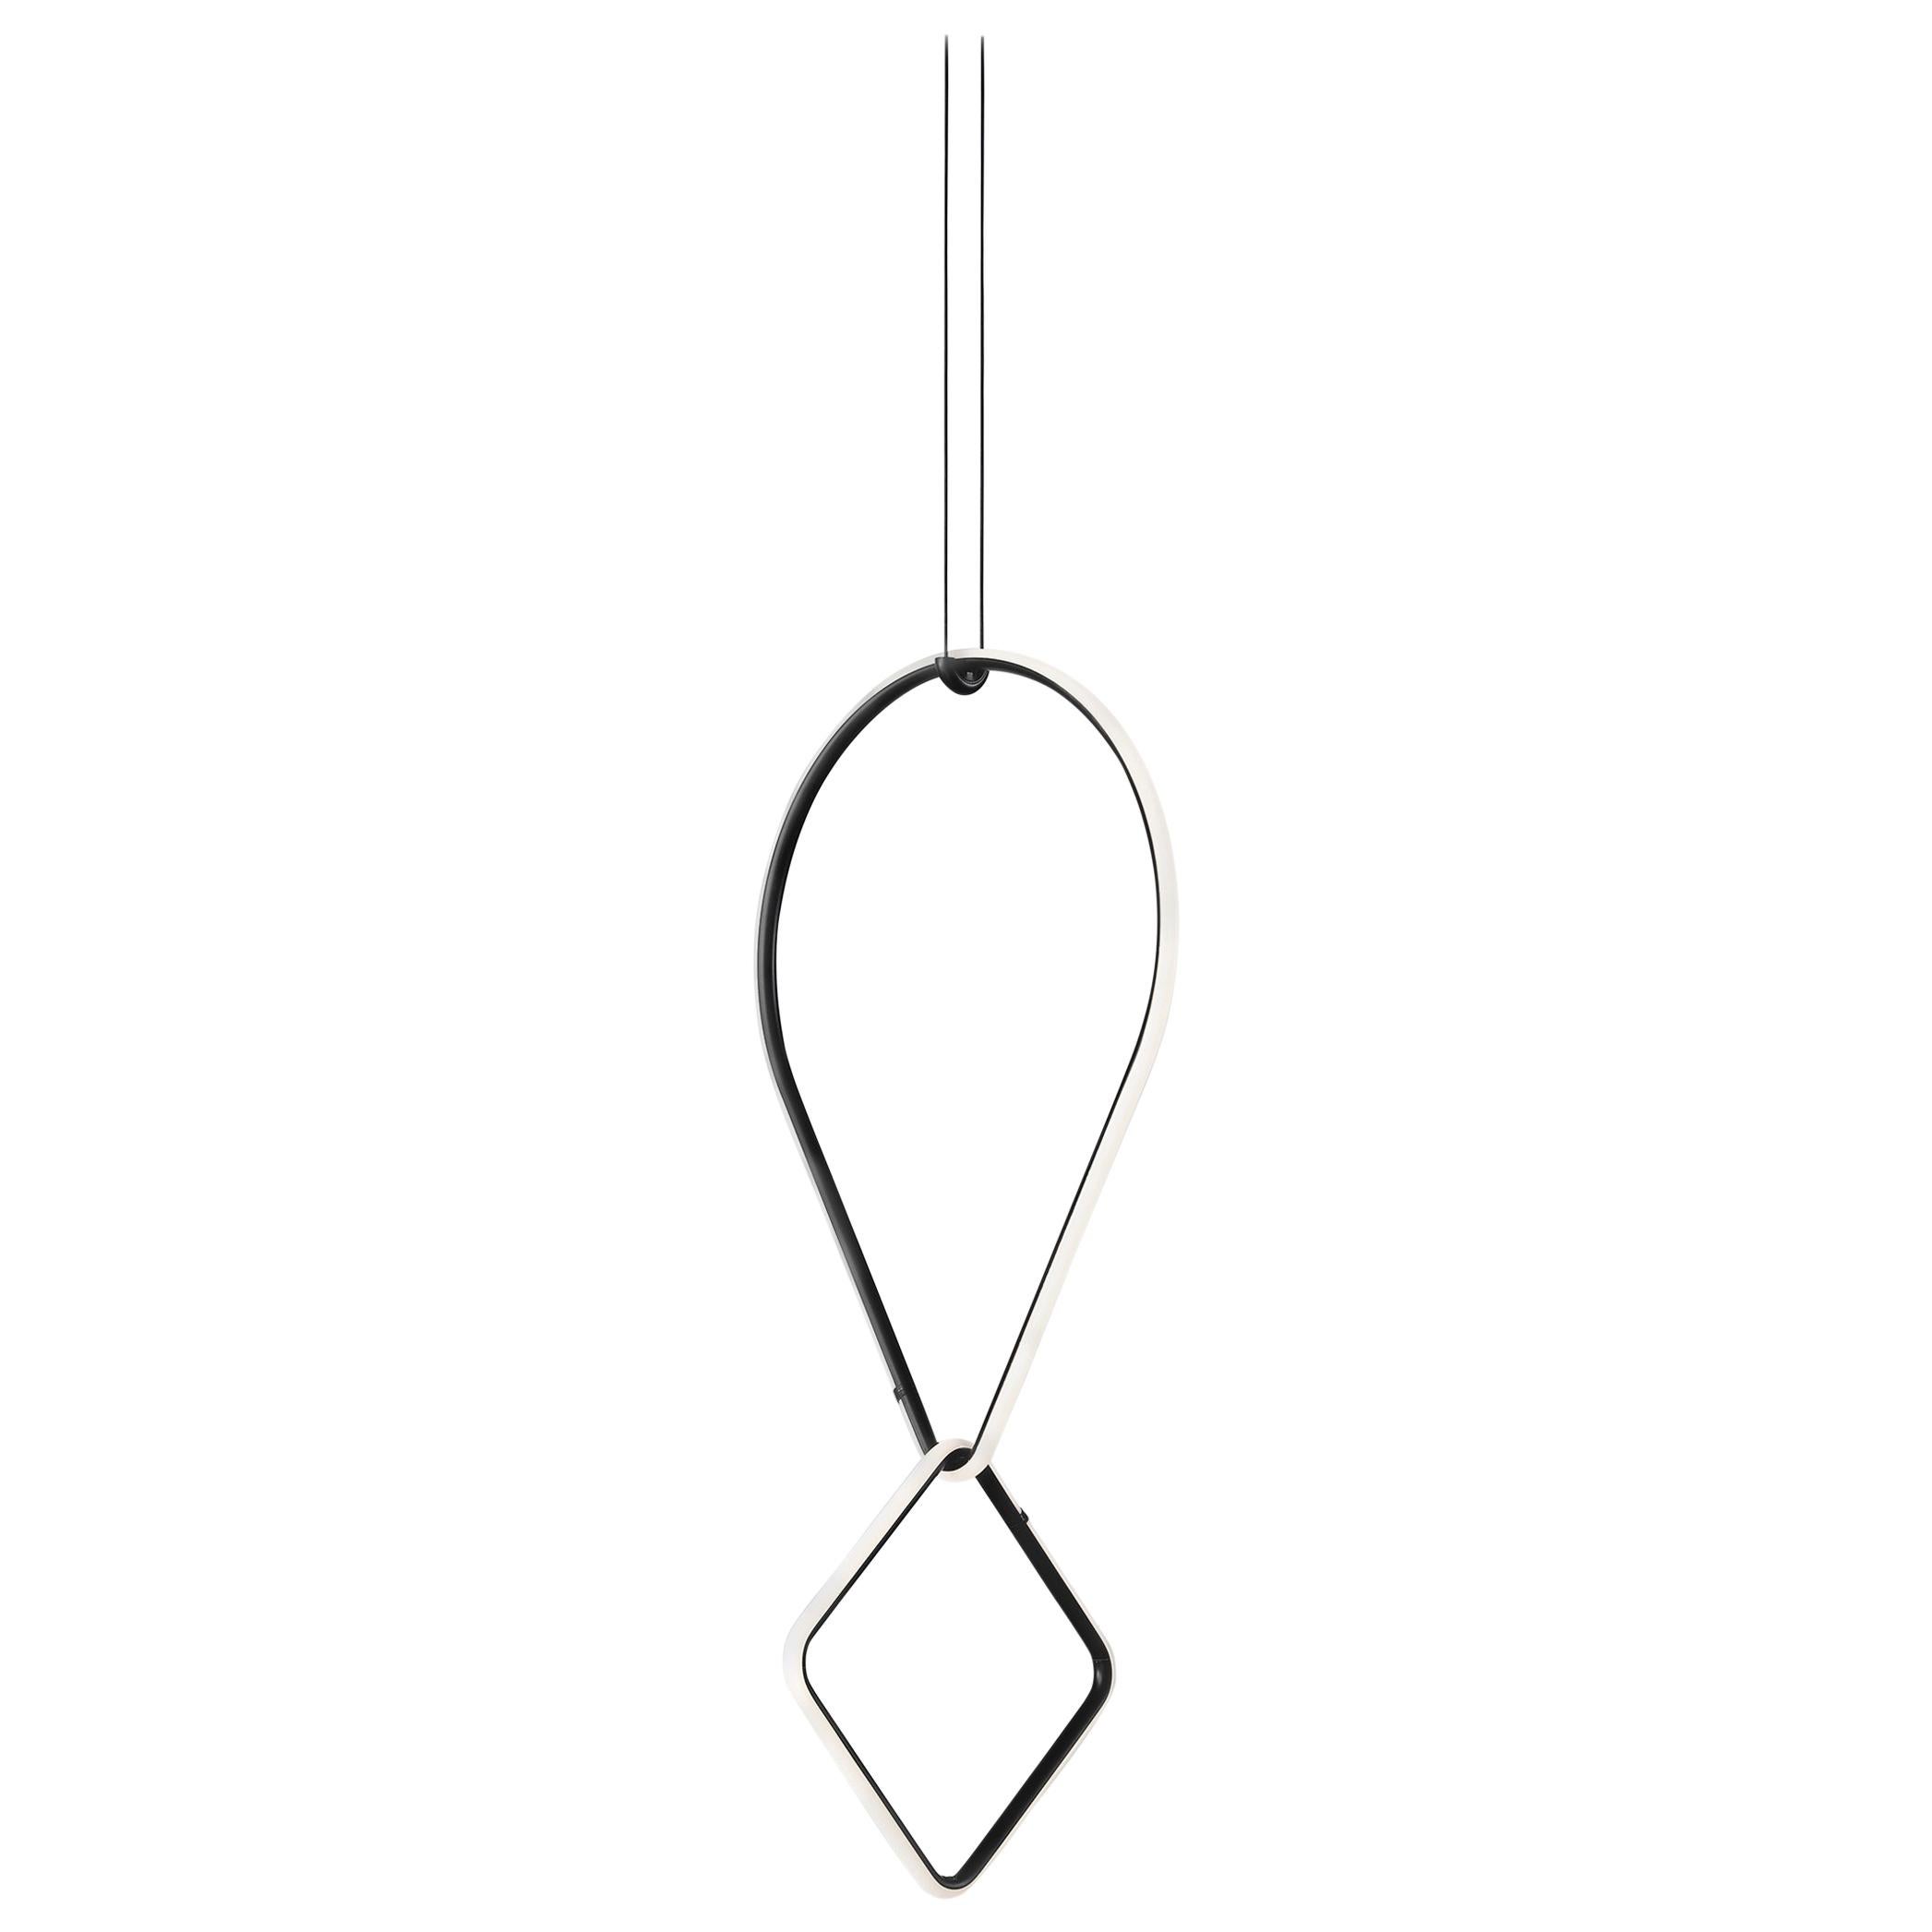 FLOS Drop Down and Small Square Arrangements Light by Michael Anastassiades For Sale